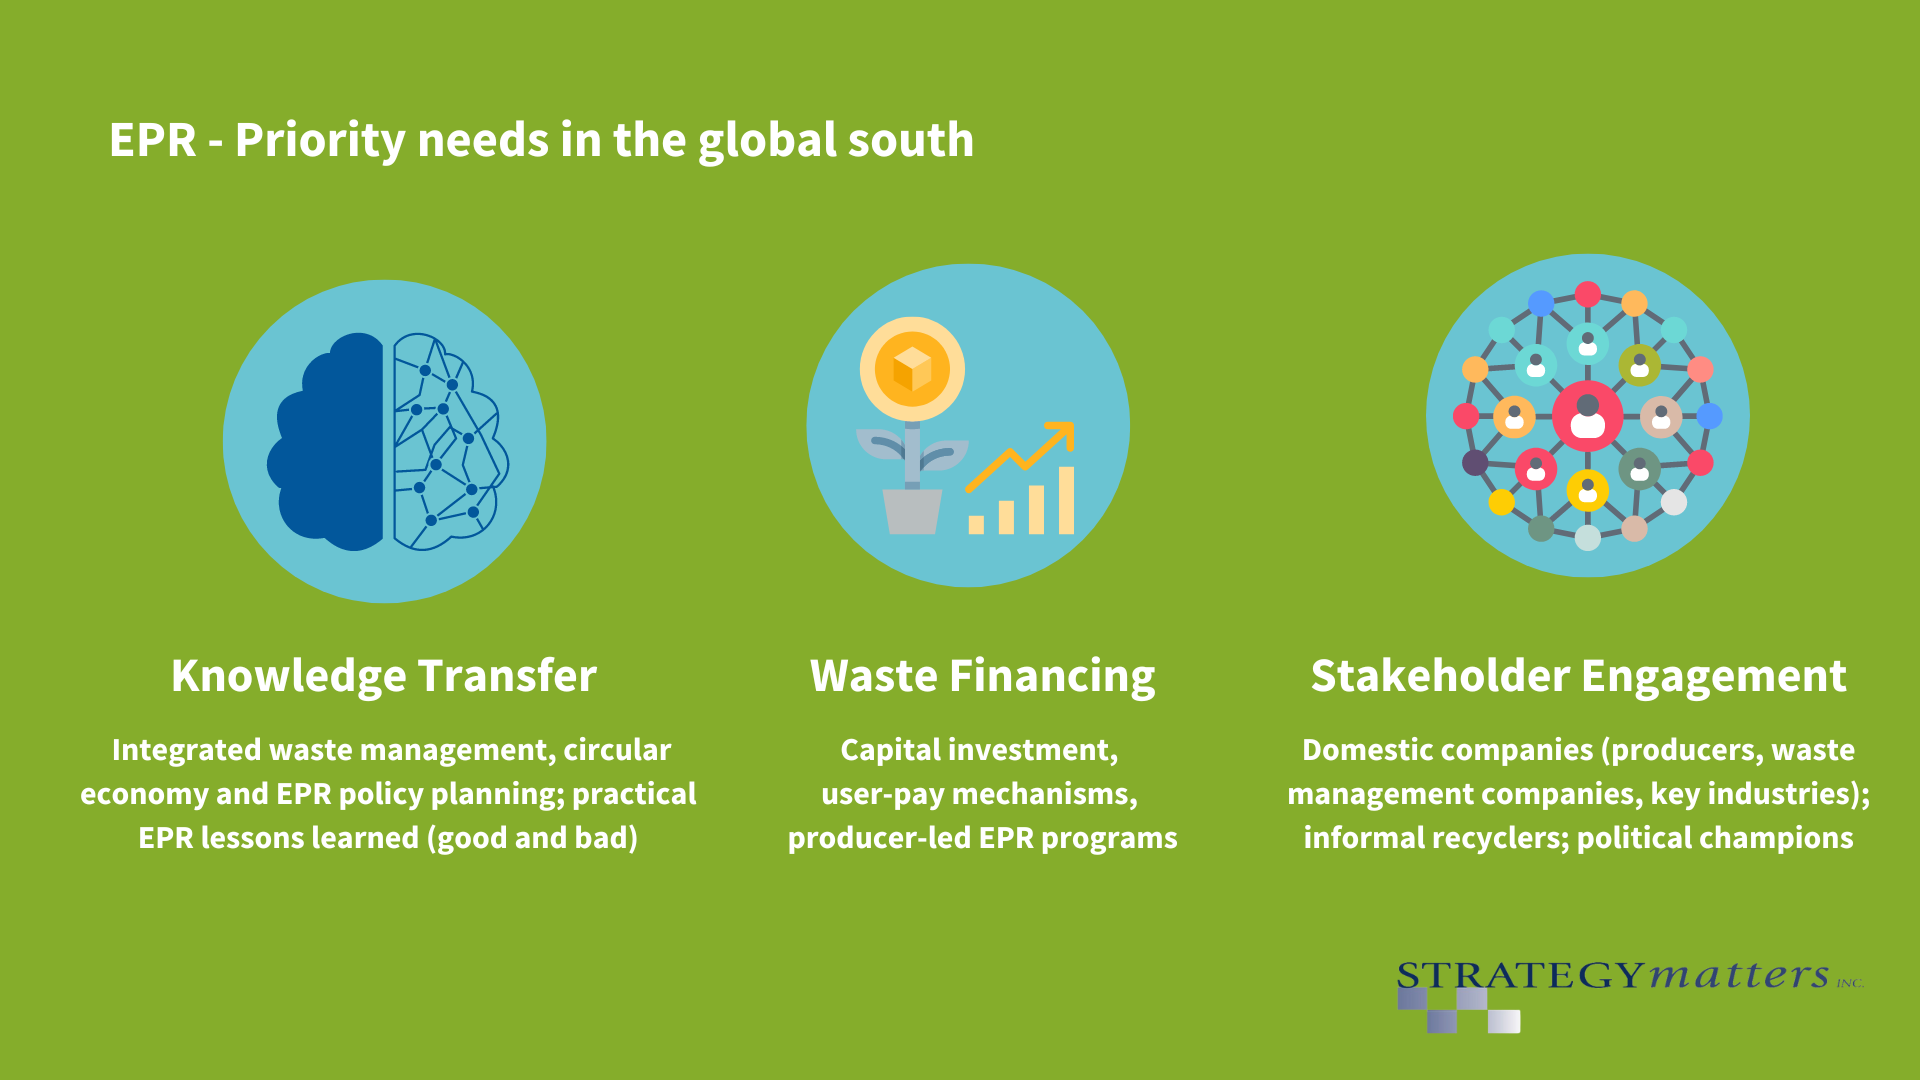 EPR Priority needs in the global south: knowledge transfer, waste financing, stakeholder engagement